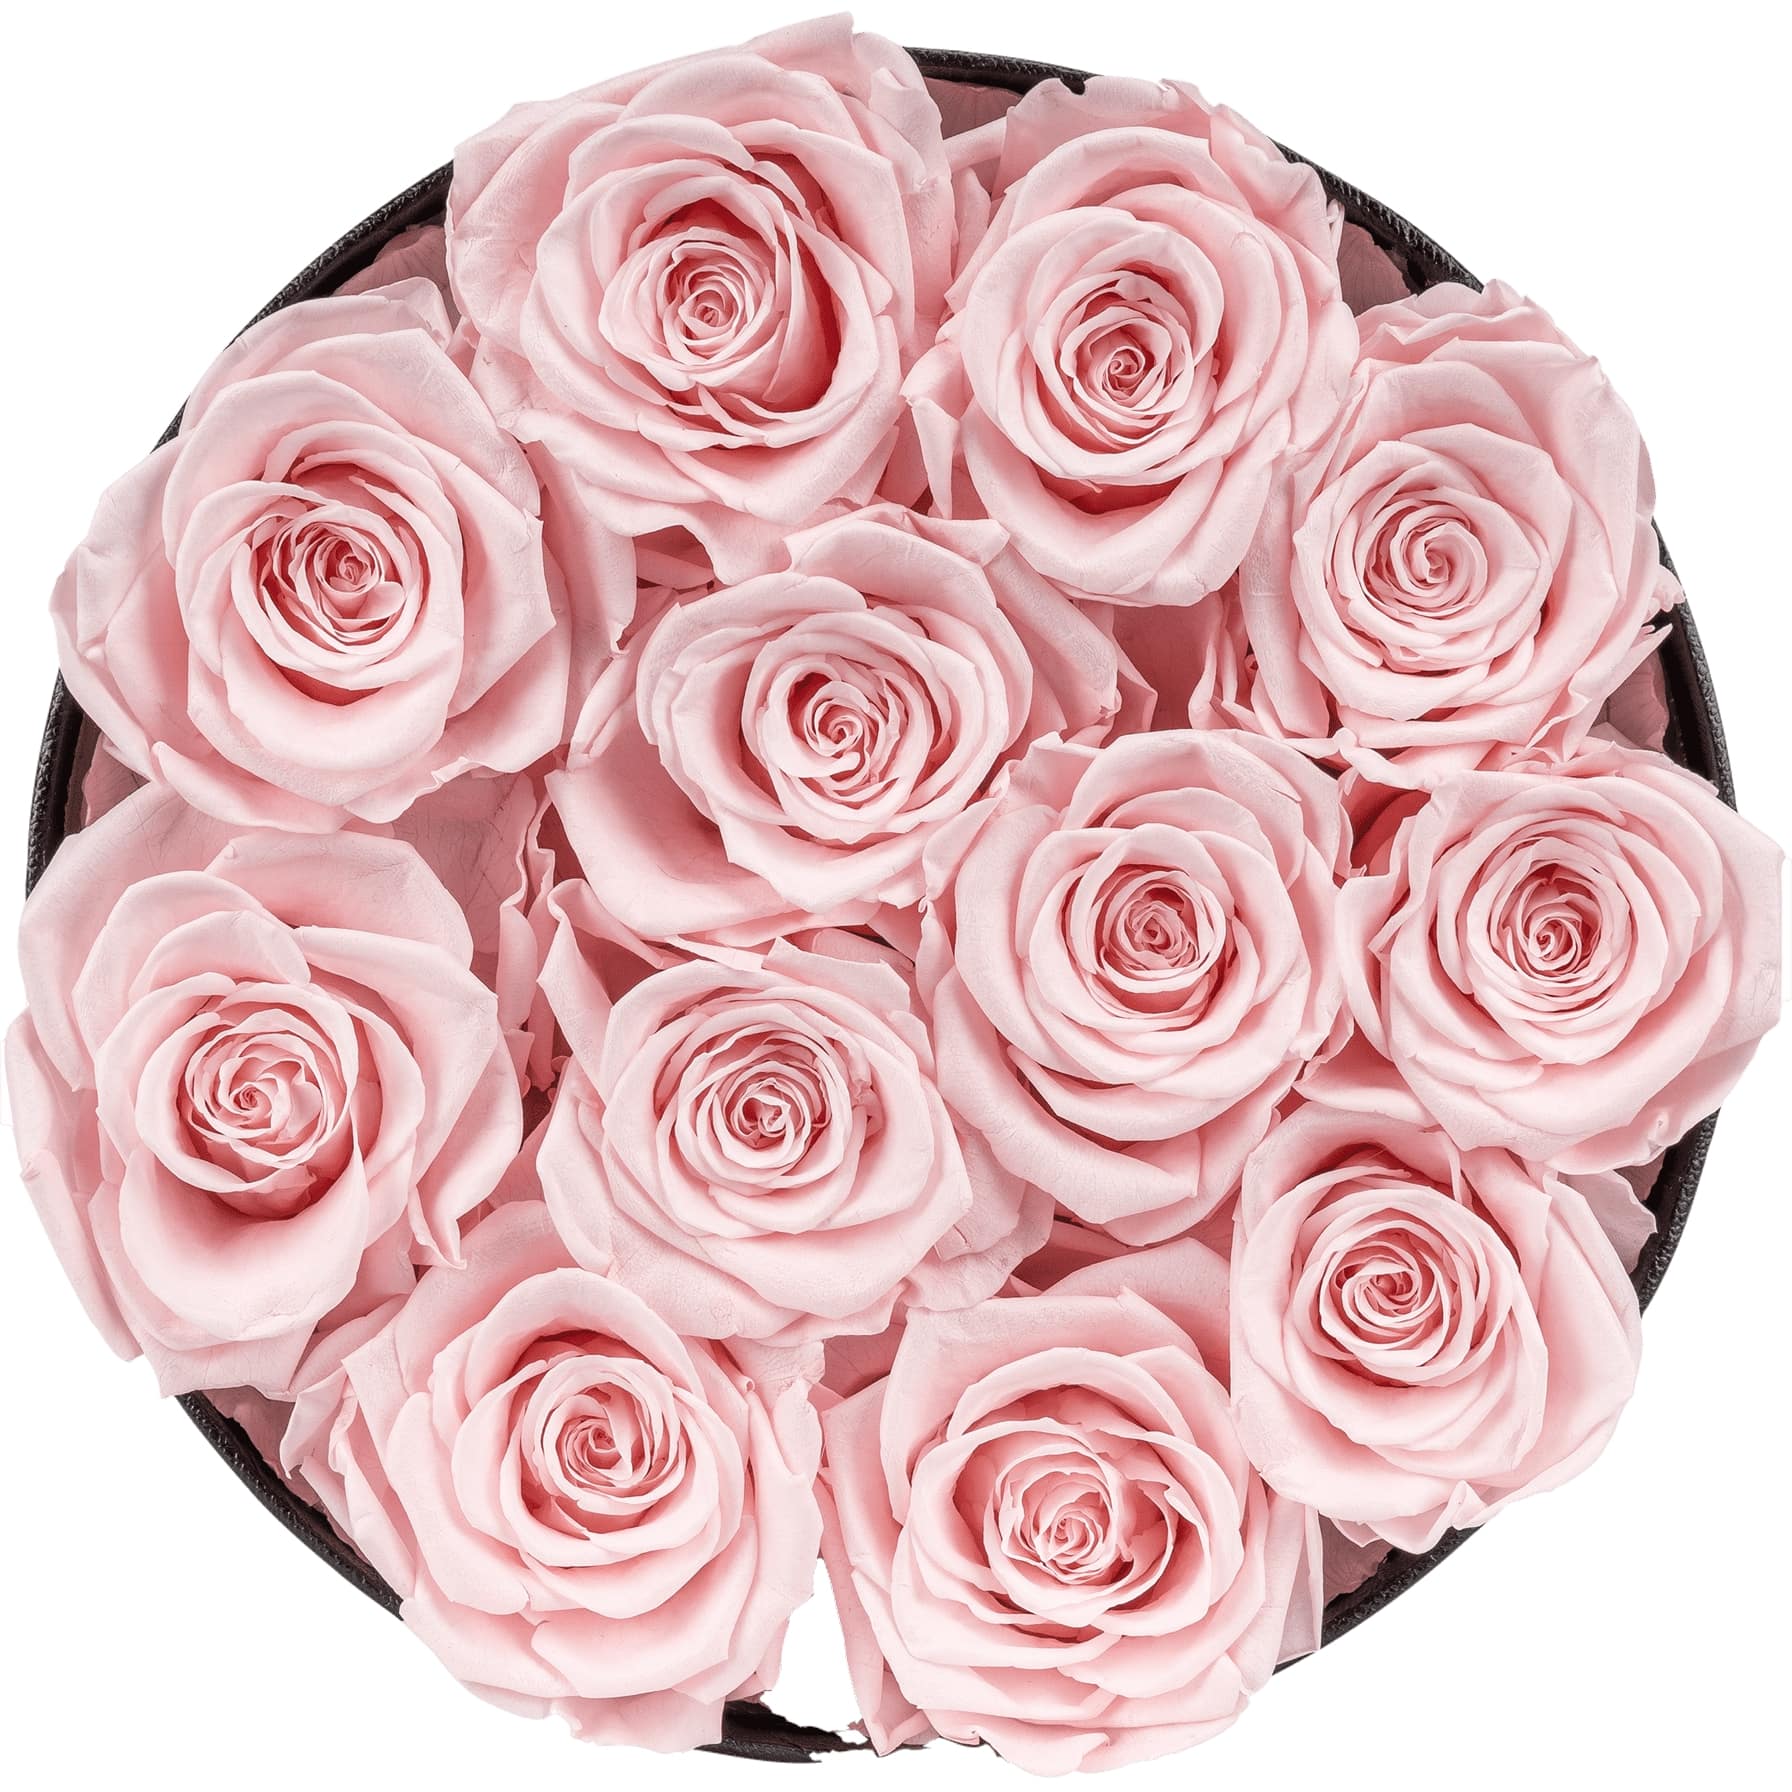 Preserved Rose Box (16 Luxury Pink Roses)